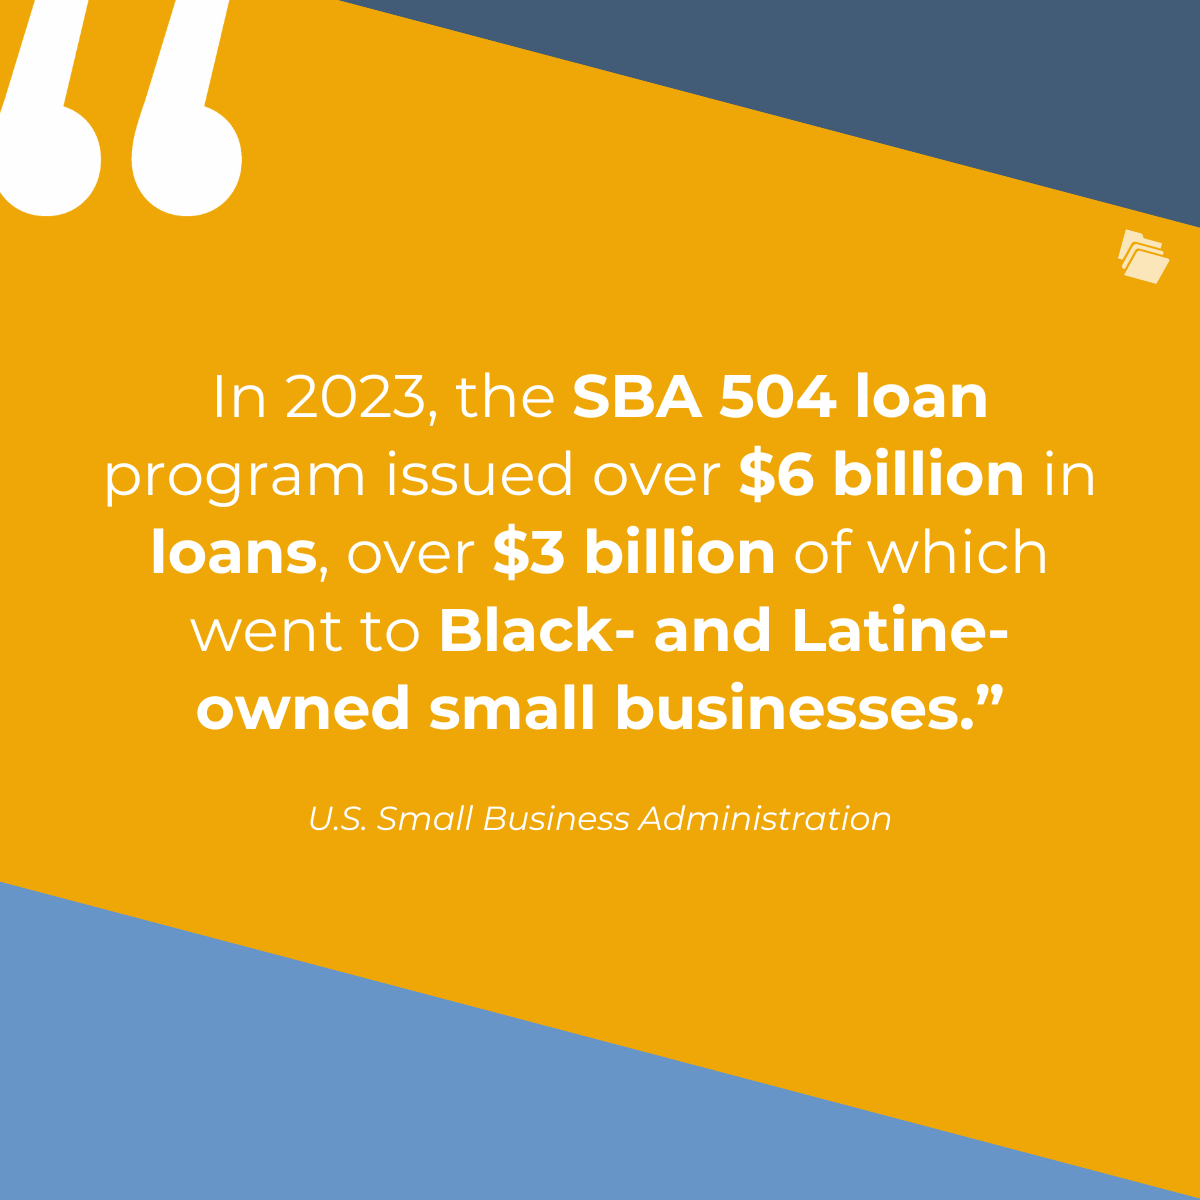 How Long Does It Take to Apply for an SBA 504 Loan?